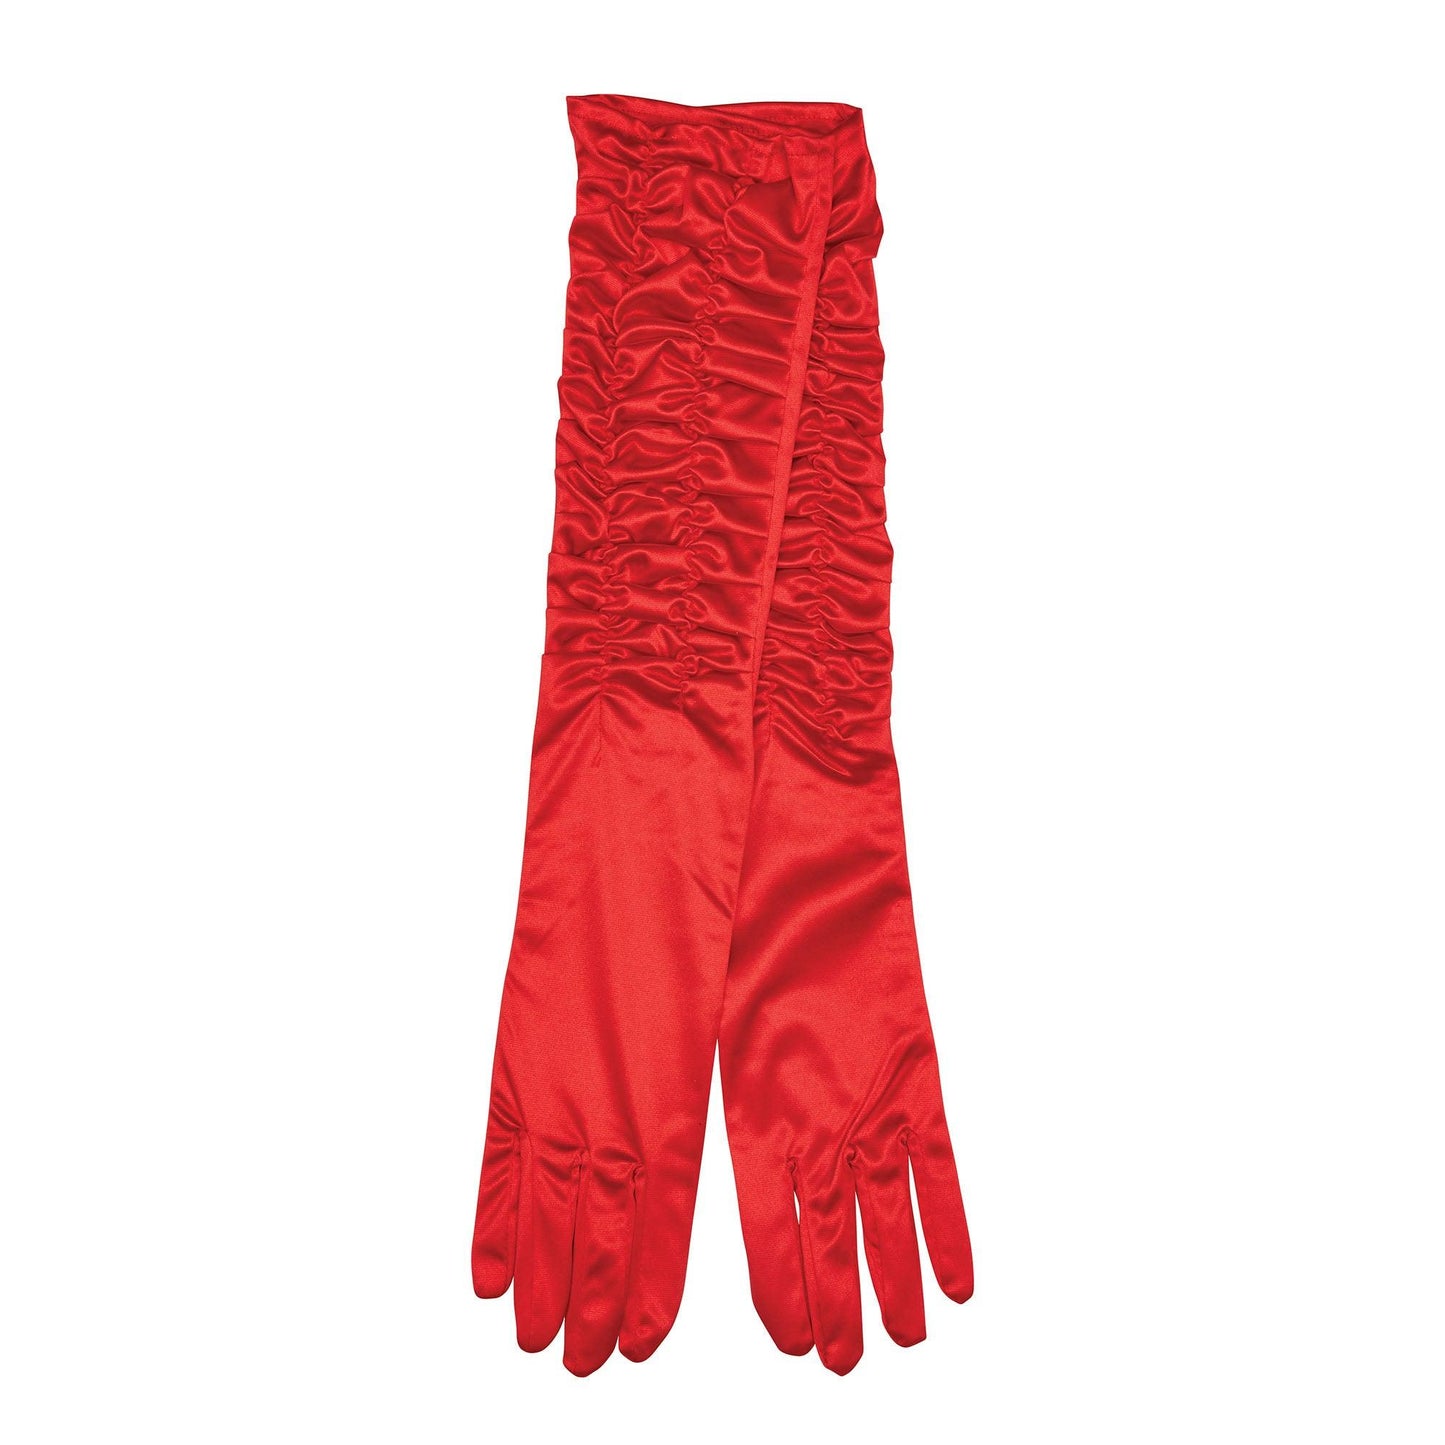 Satin Theatrical Gloves Red - Labreeze